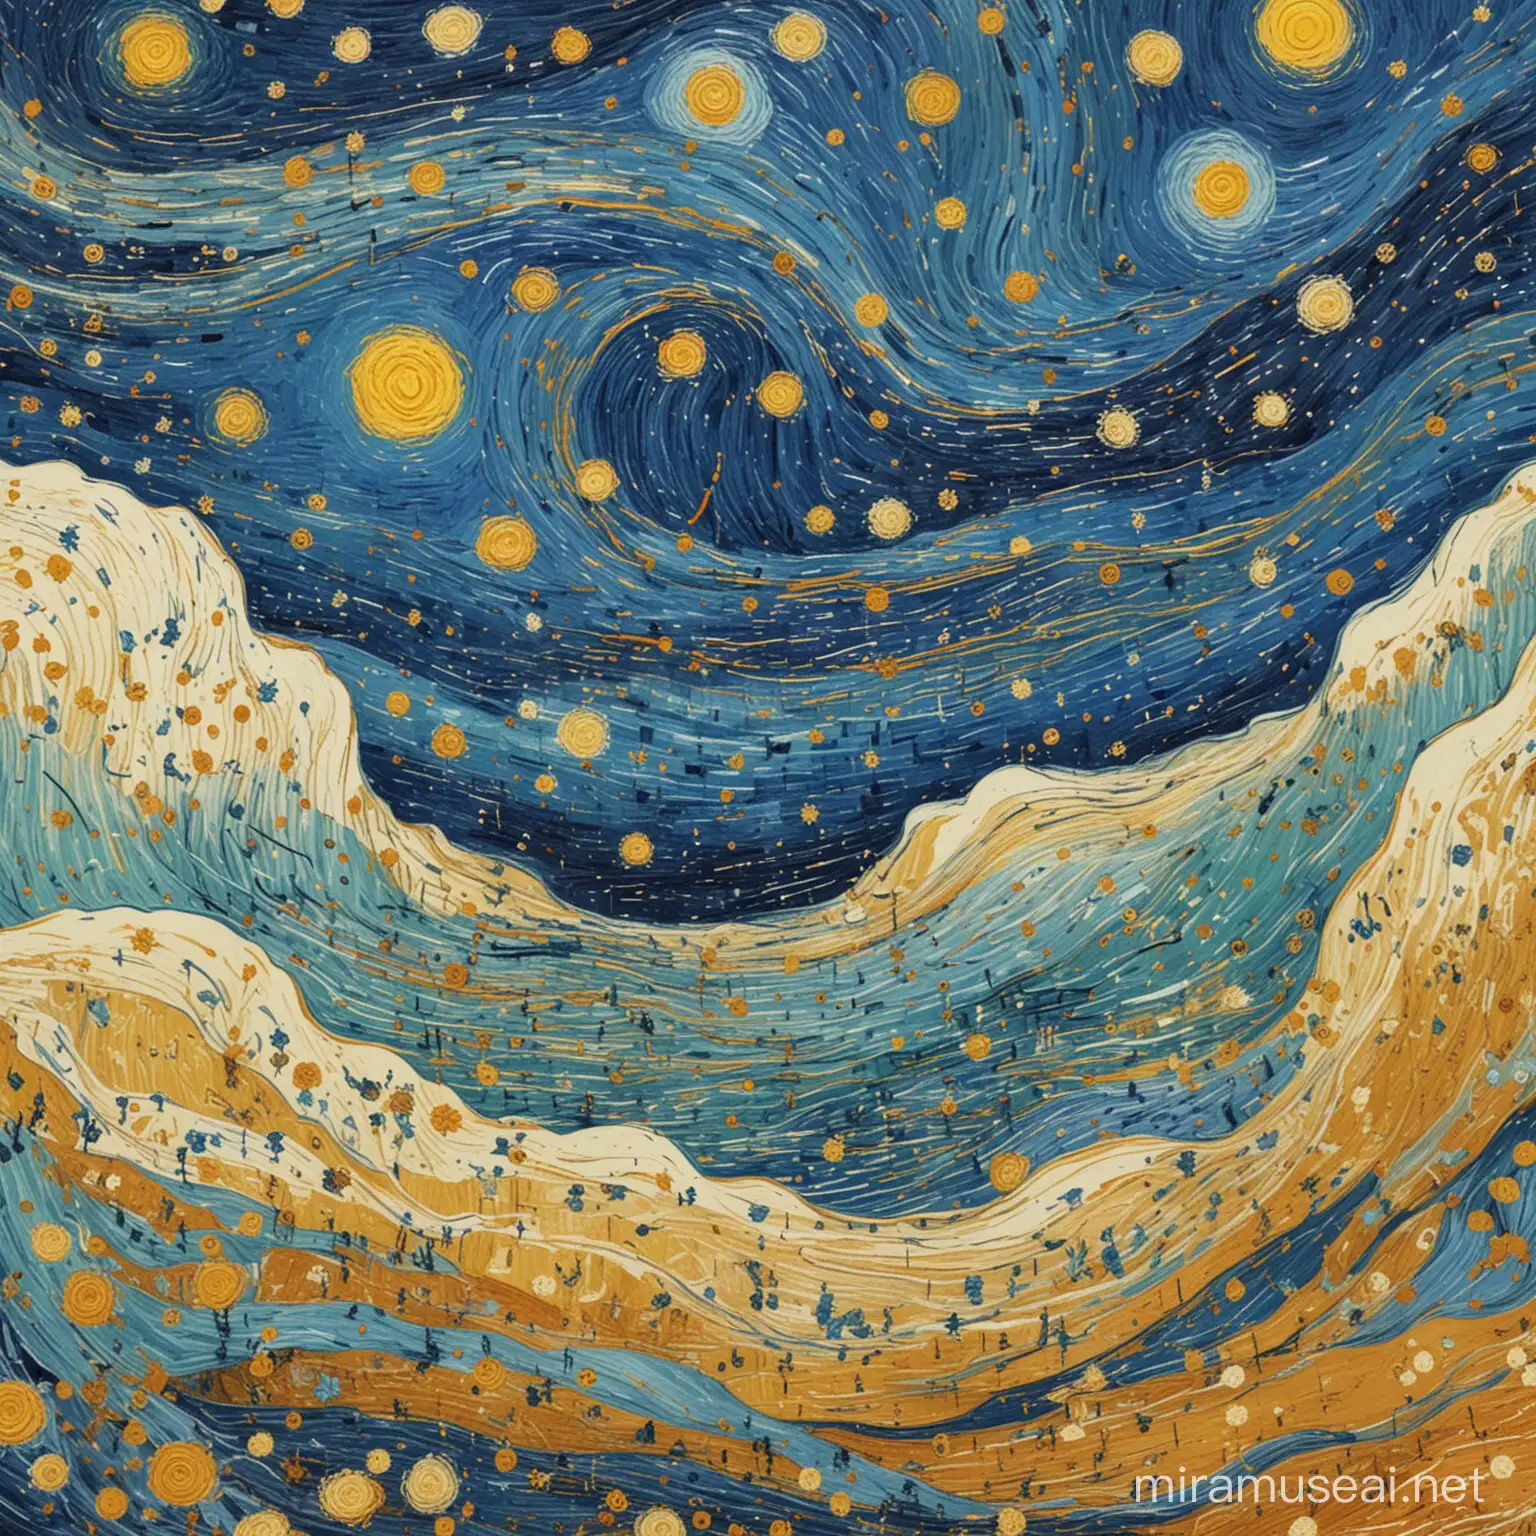 draw a cover in the style of Van Gogh for the book titled Flow modeling and control: advances and applications of modal analysis and machine learning in fluid mechanics
